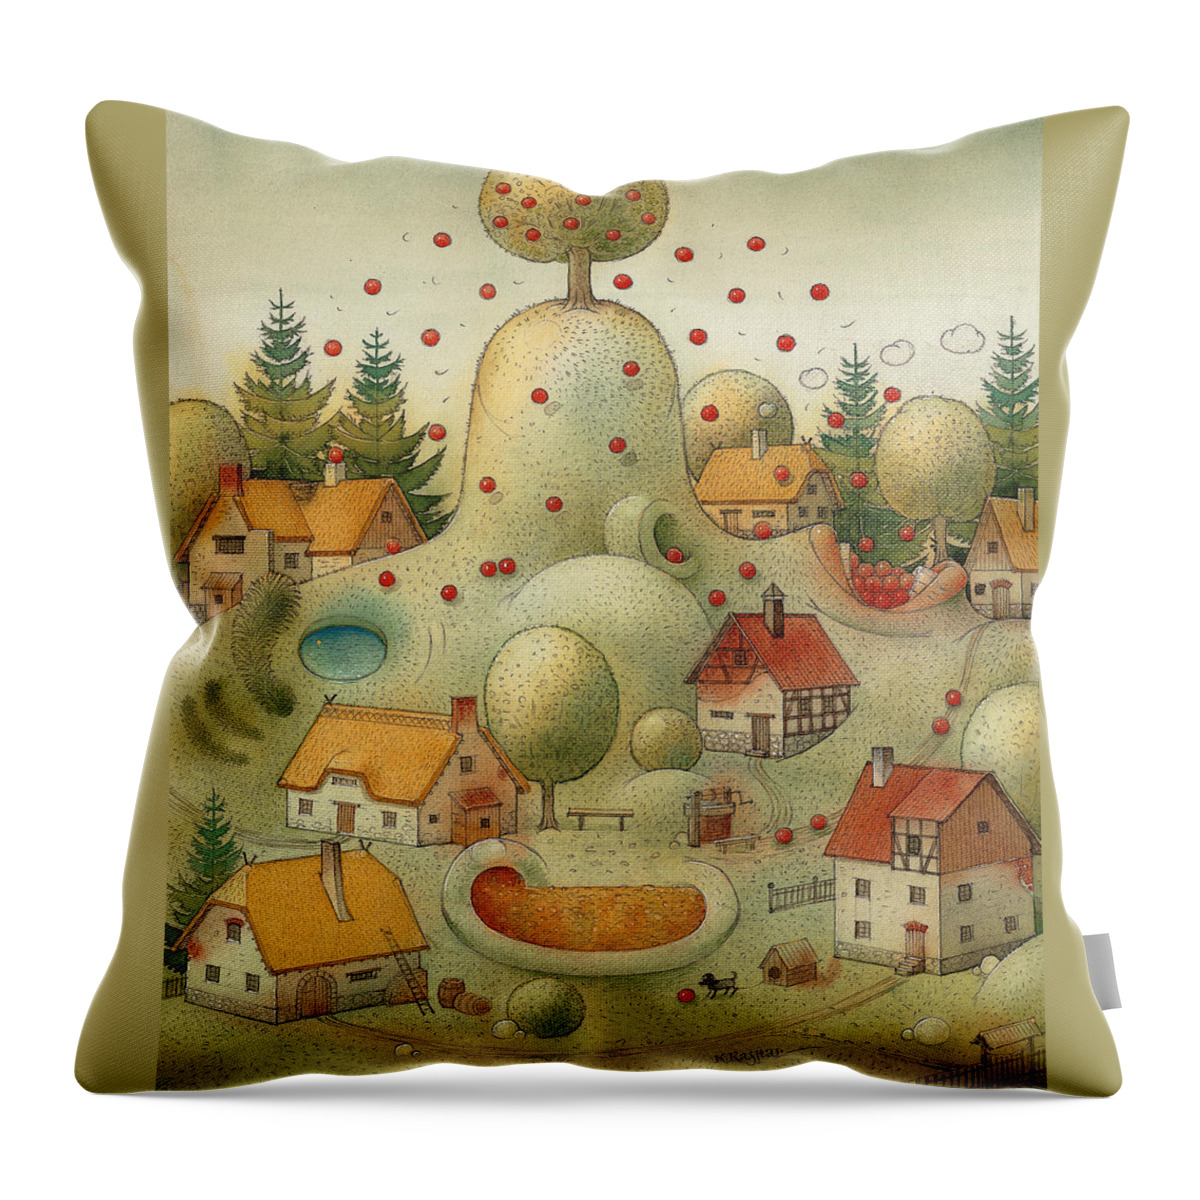 Hill Throw Pillow featuring the painting Hill by Kestutis Kasparavicius